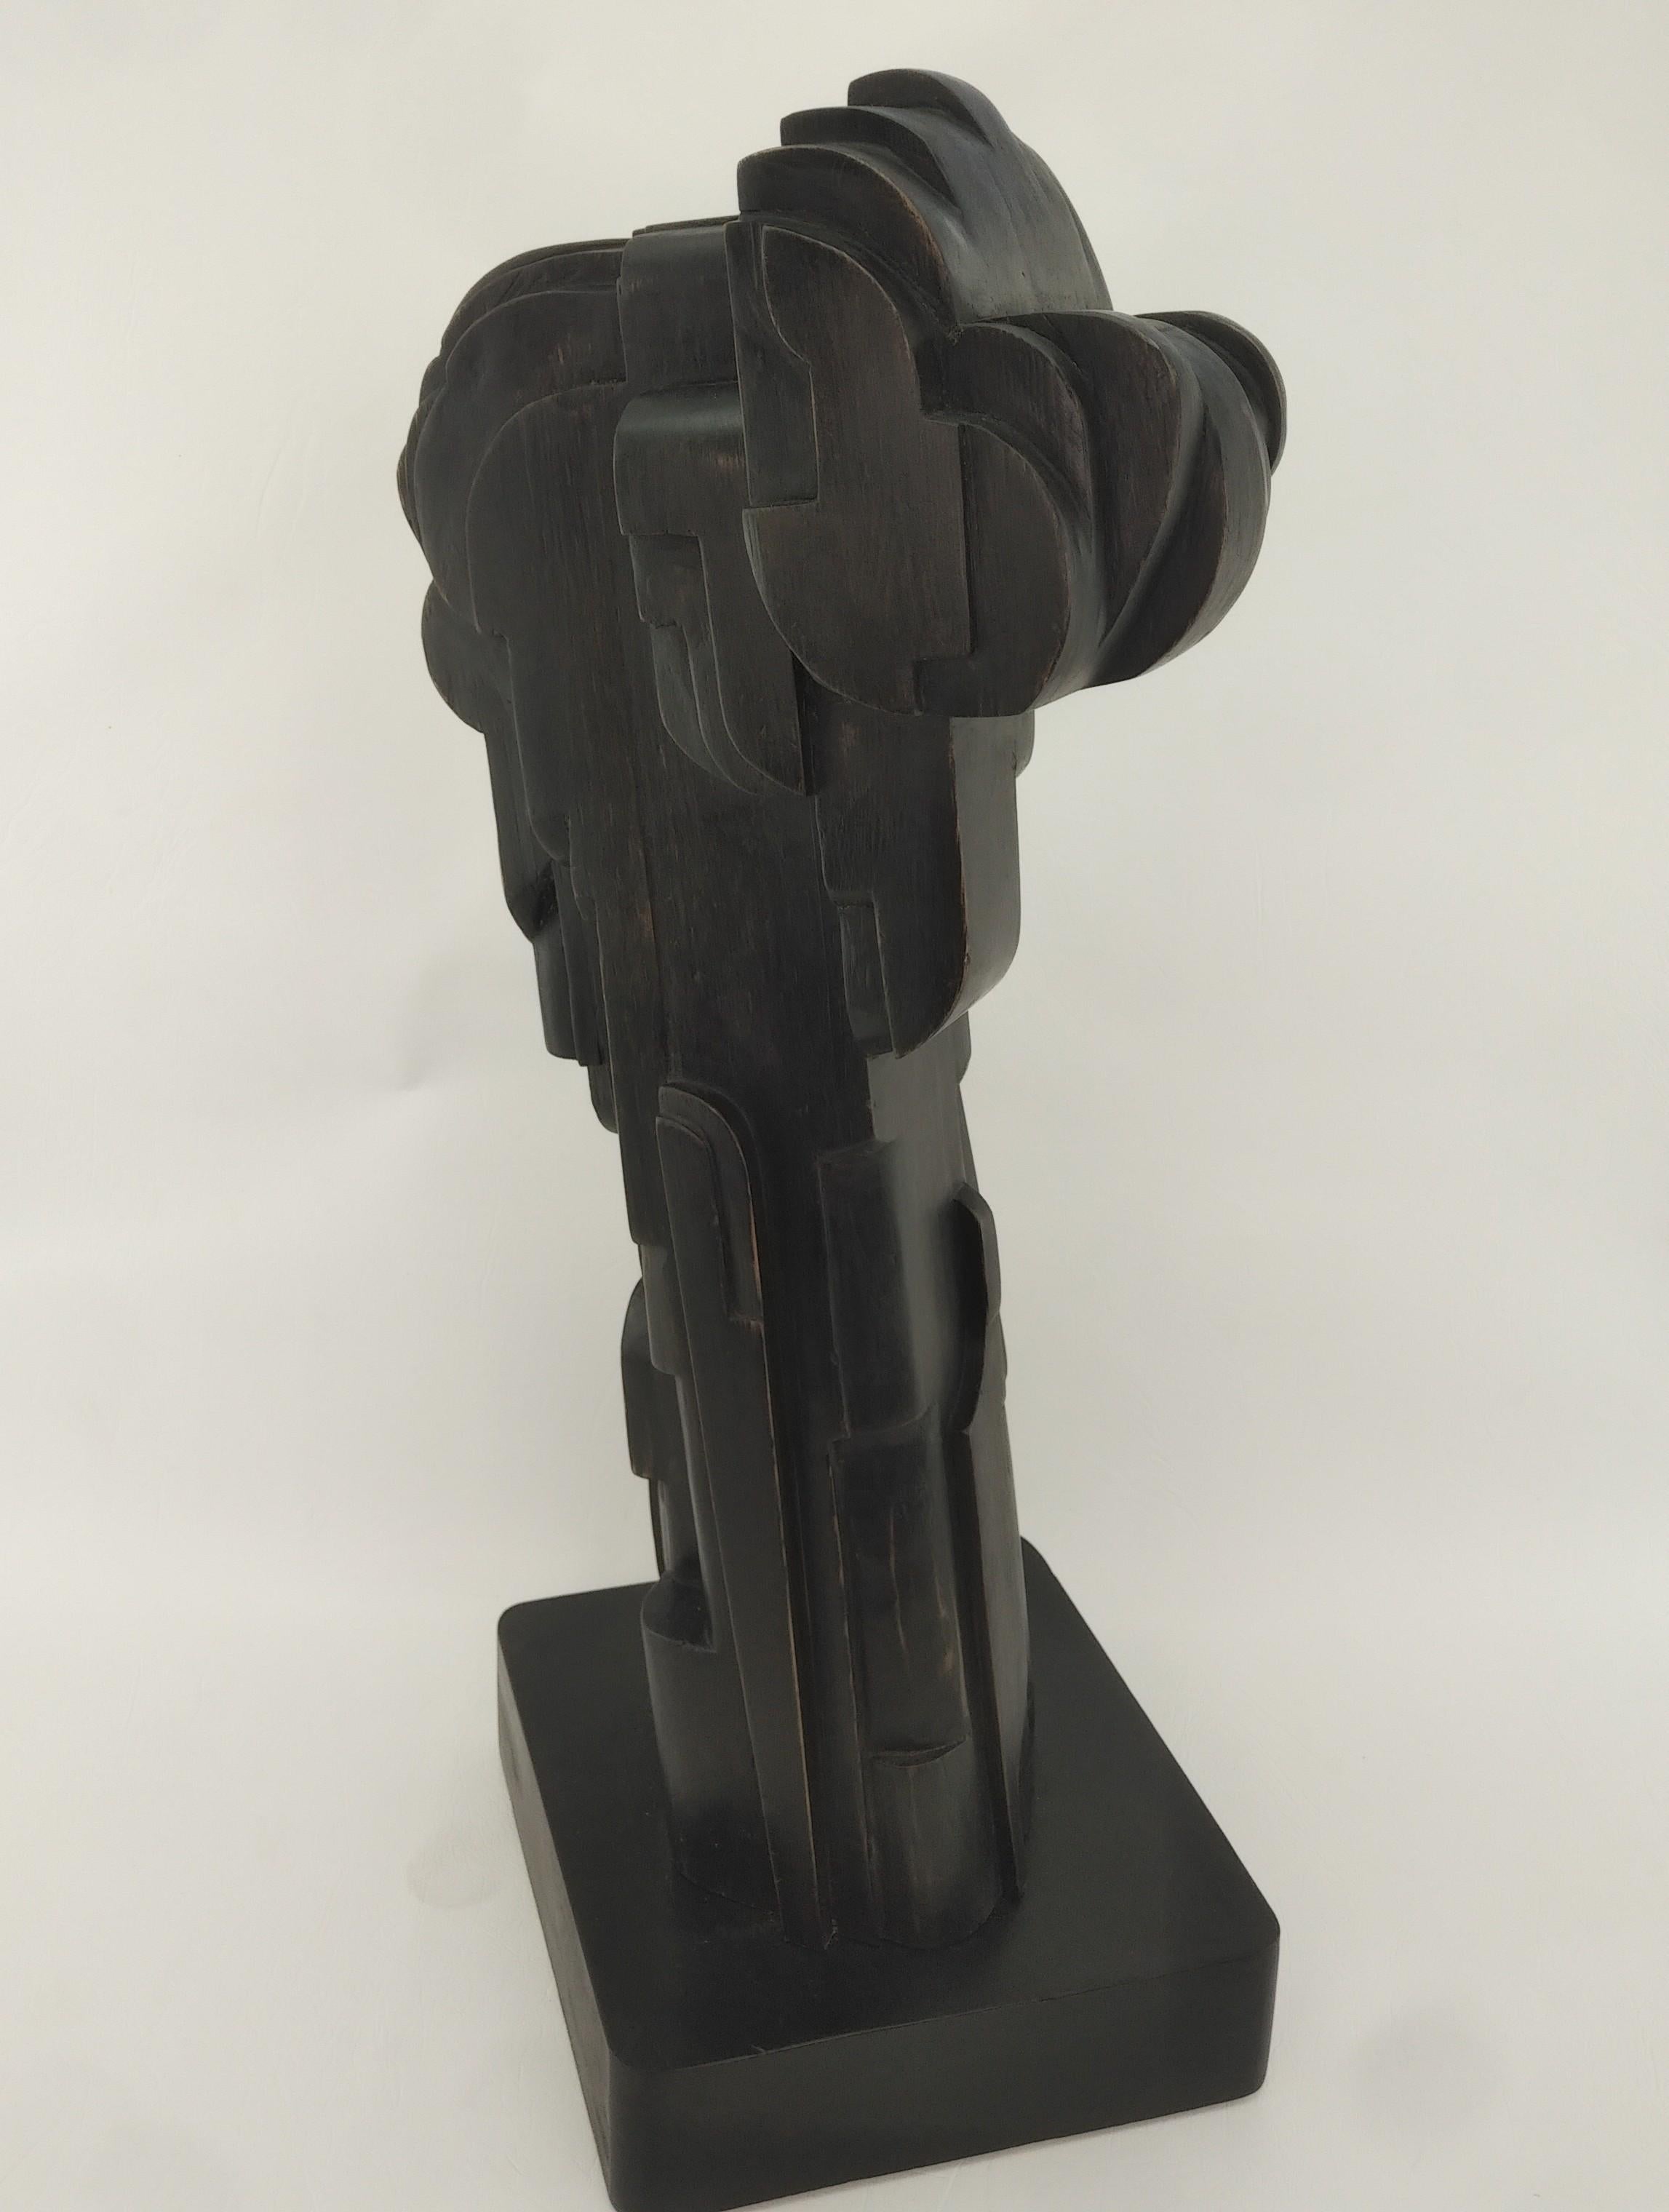 Modern Abstract Constructivist Wood Sculpture Signed Czeslaw Budny  For Sale 1